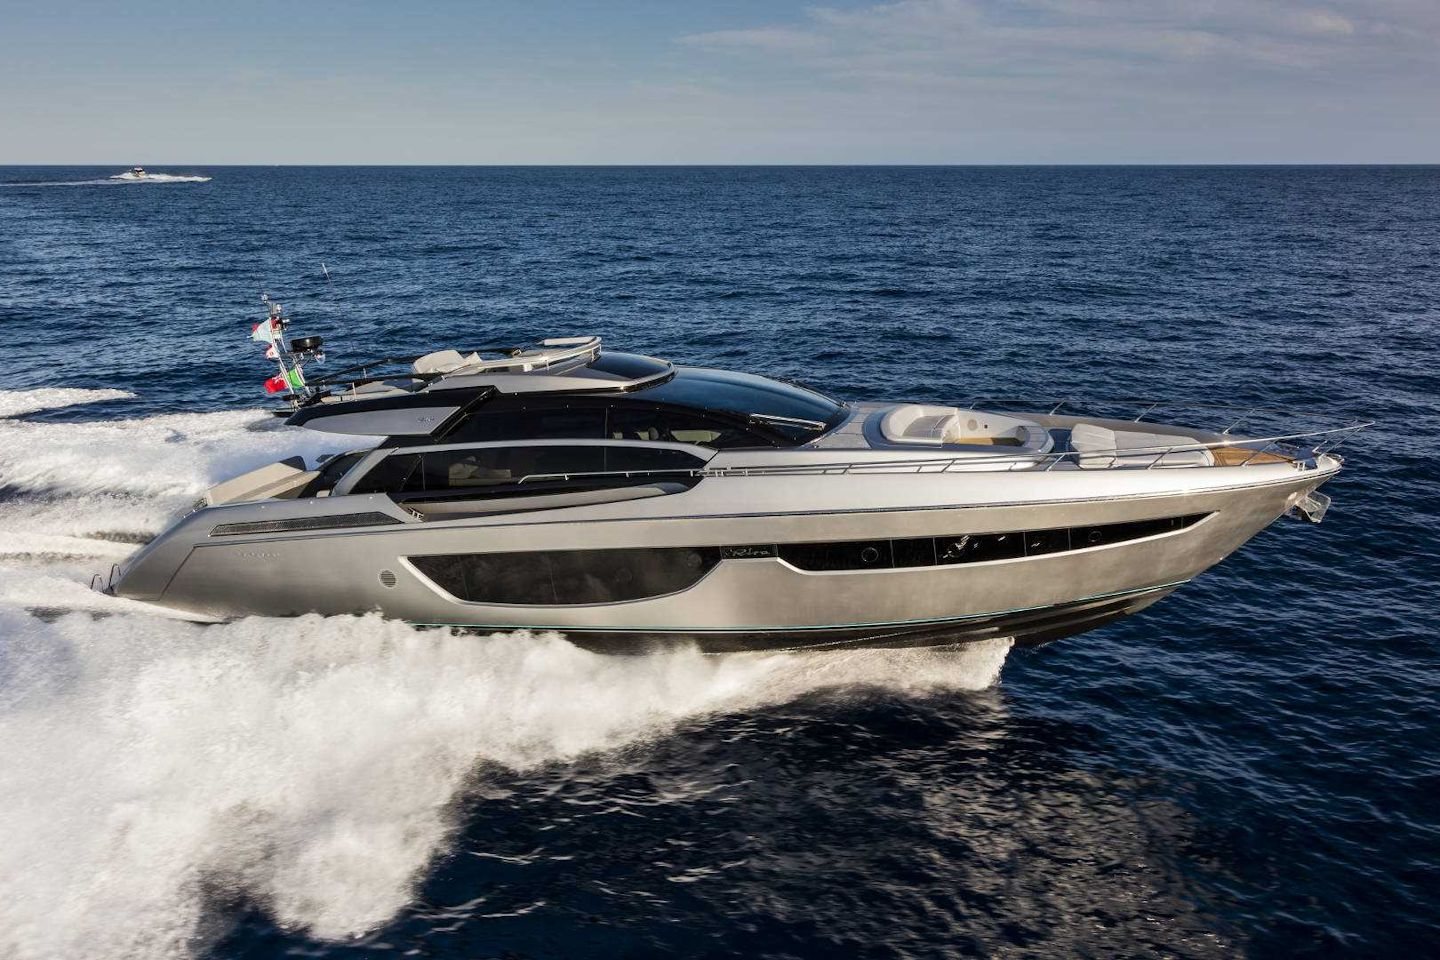 360 VR Virtual Tours of the Riva 76 Perseo